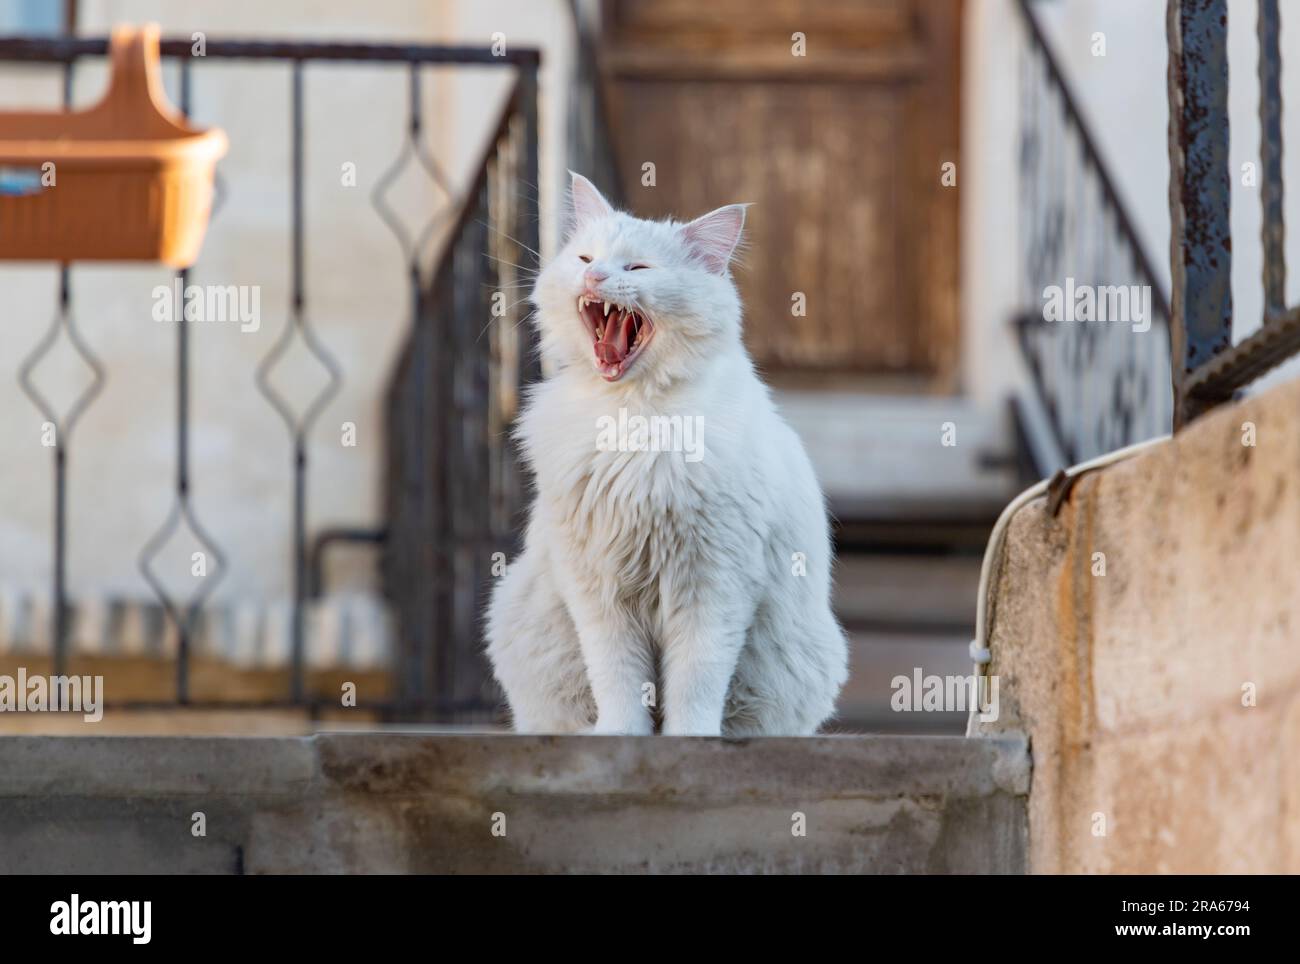 A picture of a white Turkish Angora cat yawning atop some stairs. Stock Photo